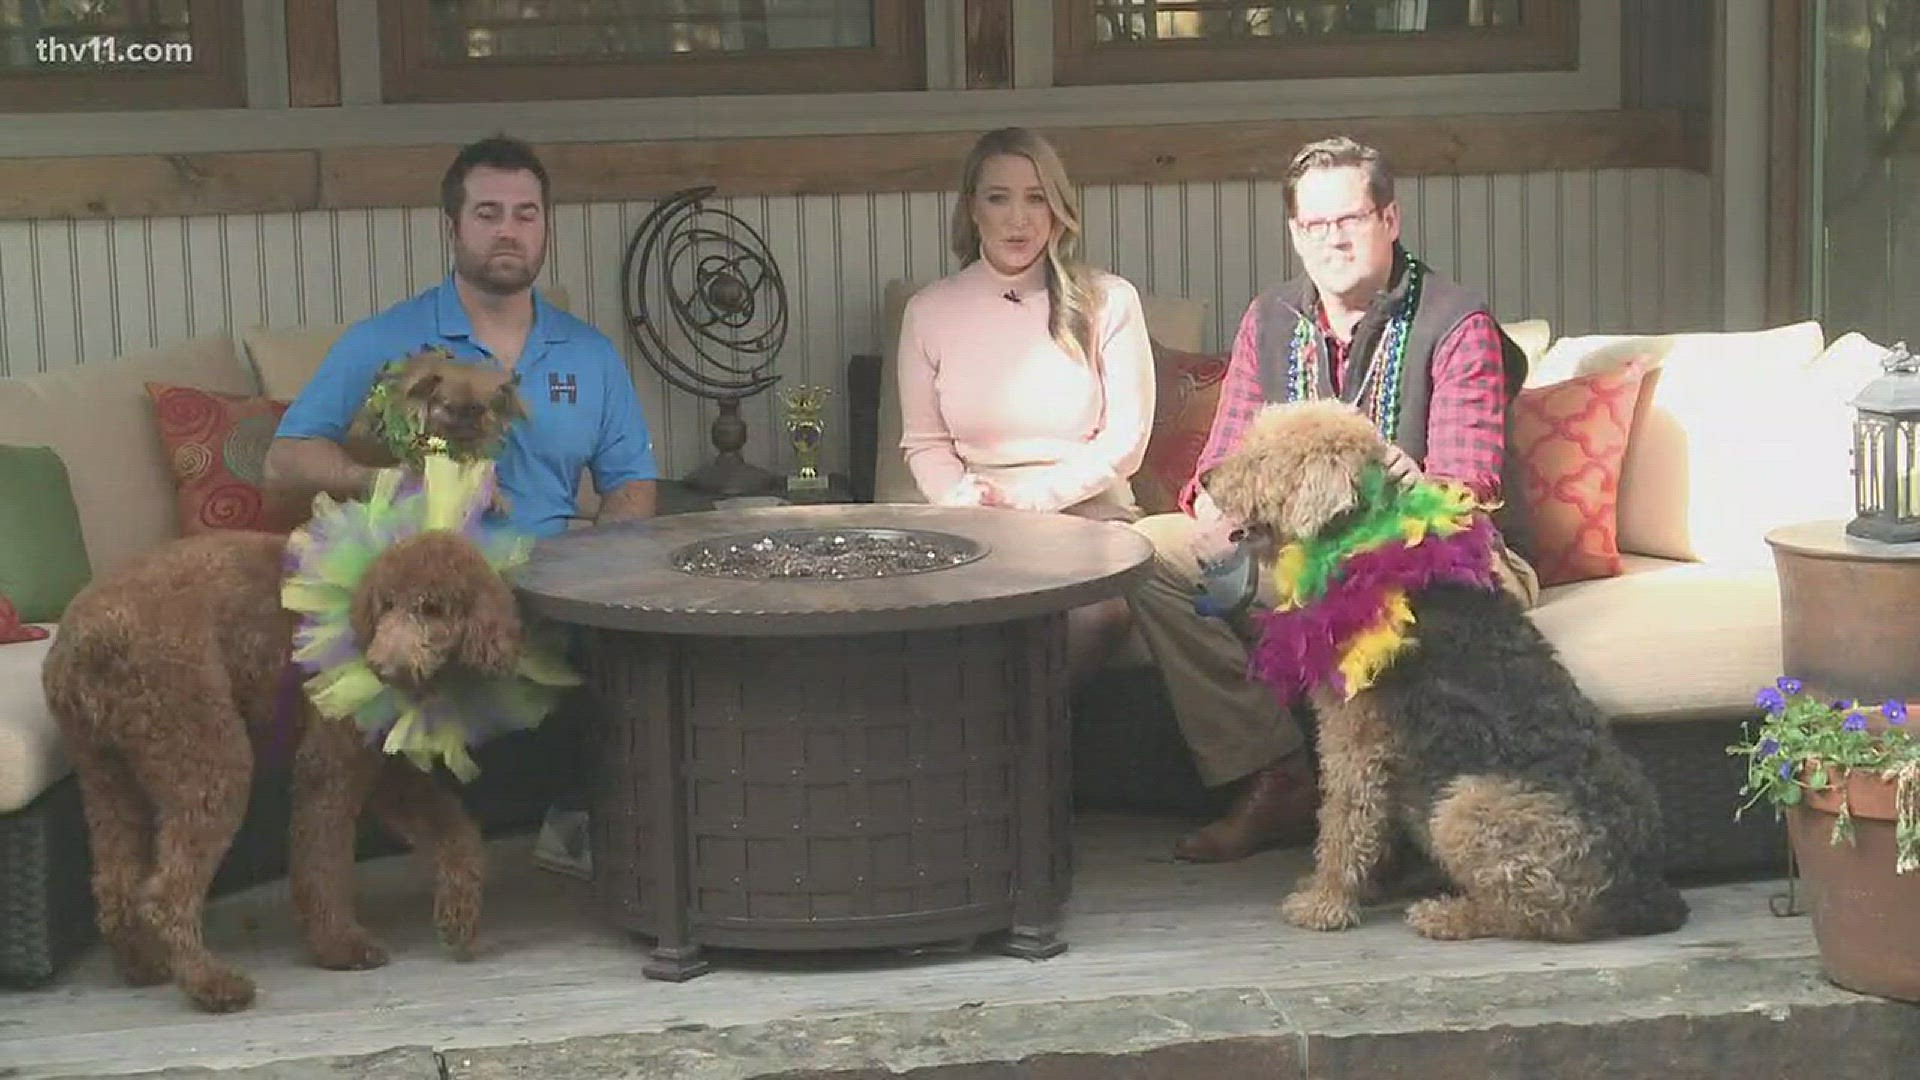 Some of the pups of the Barkus on Main parade stopped by the studio for an interview.